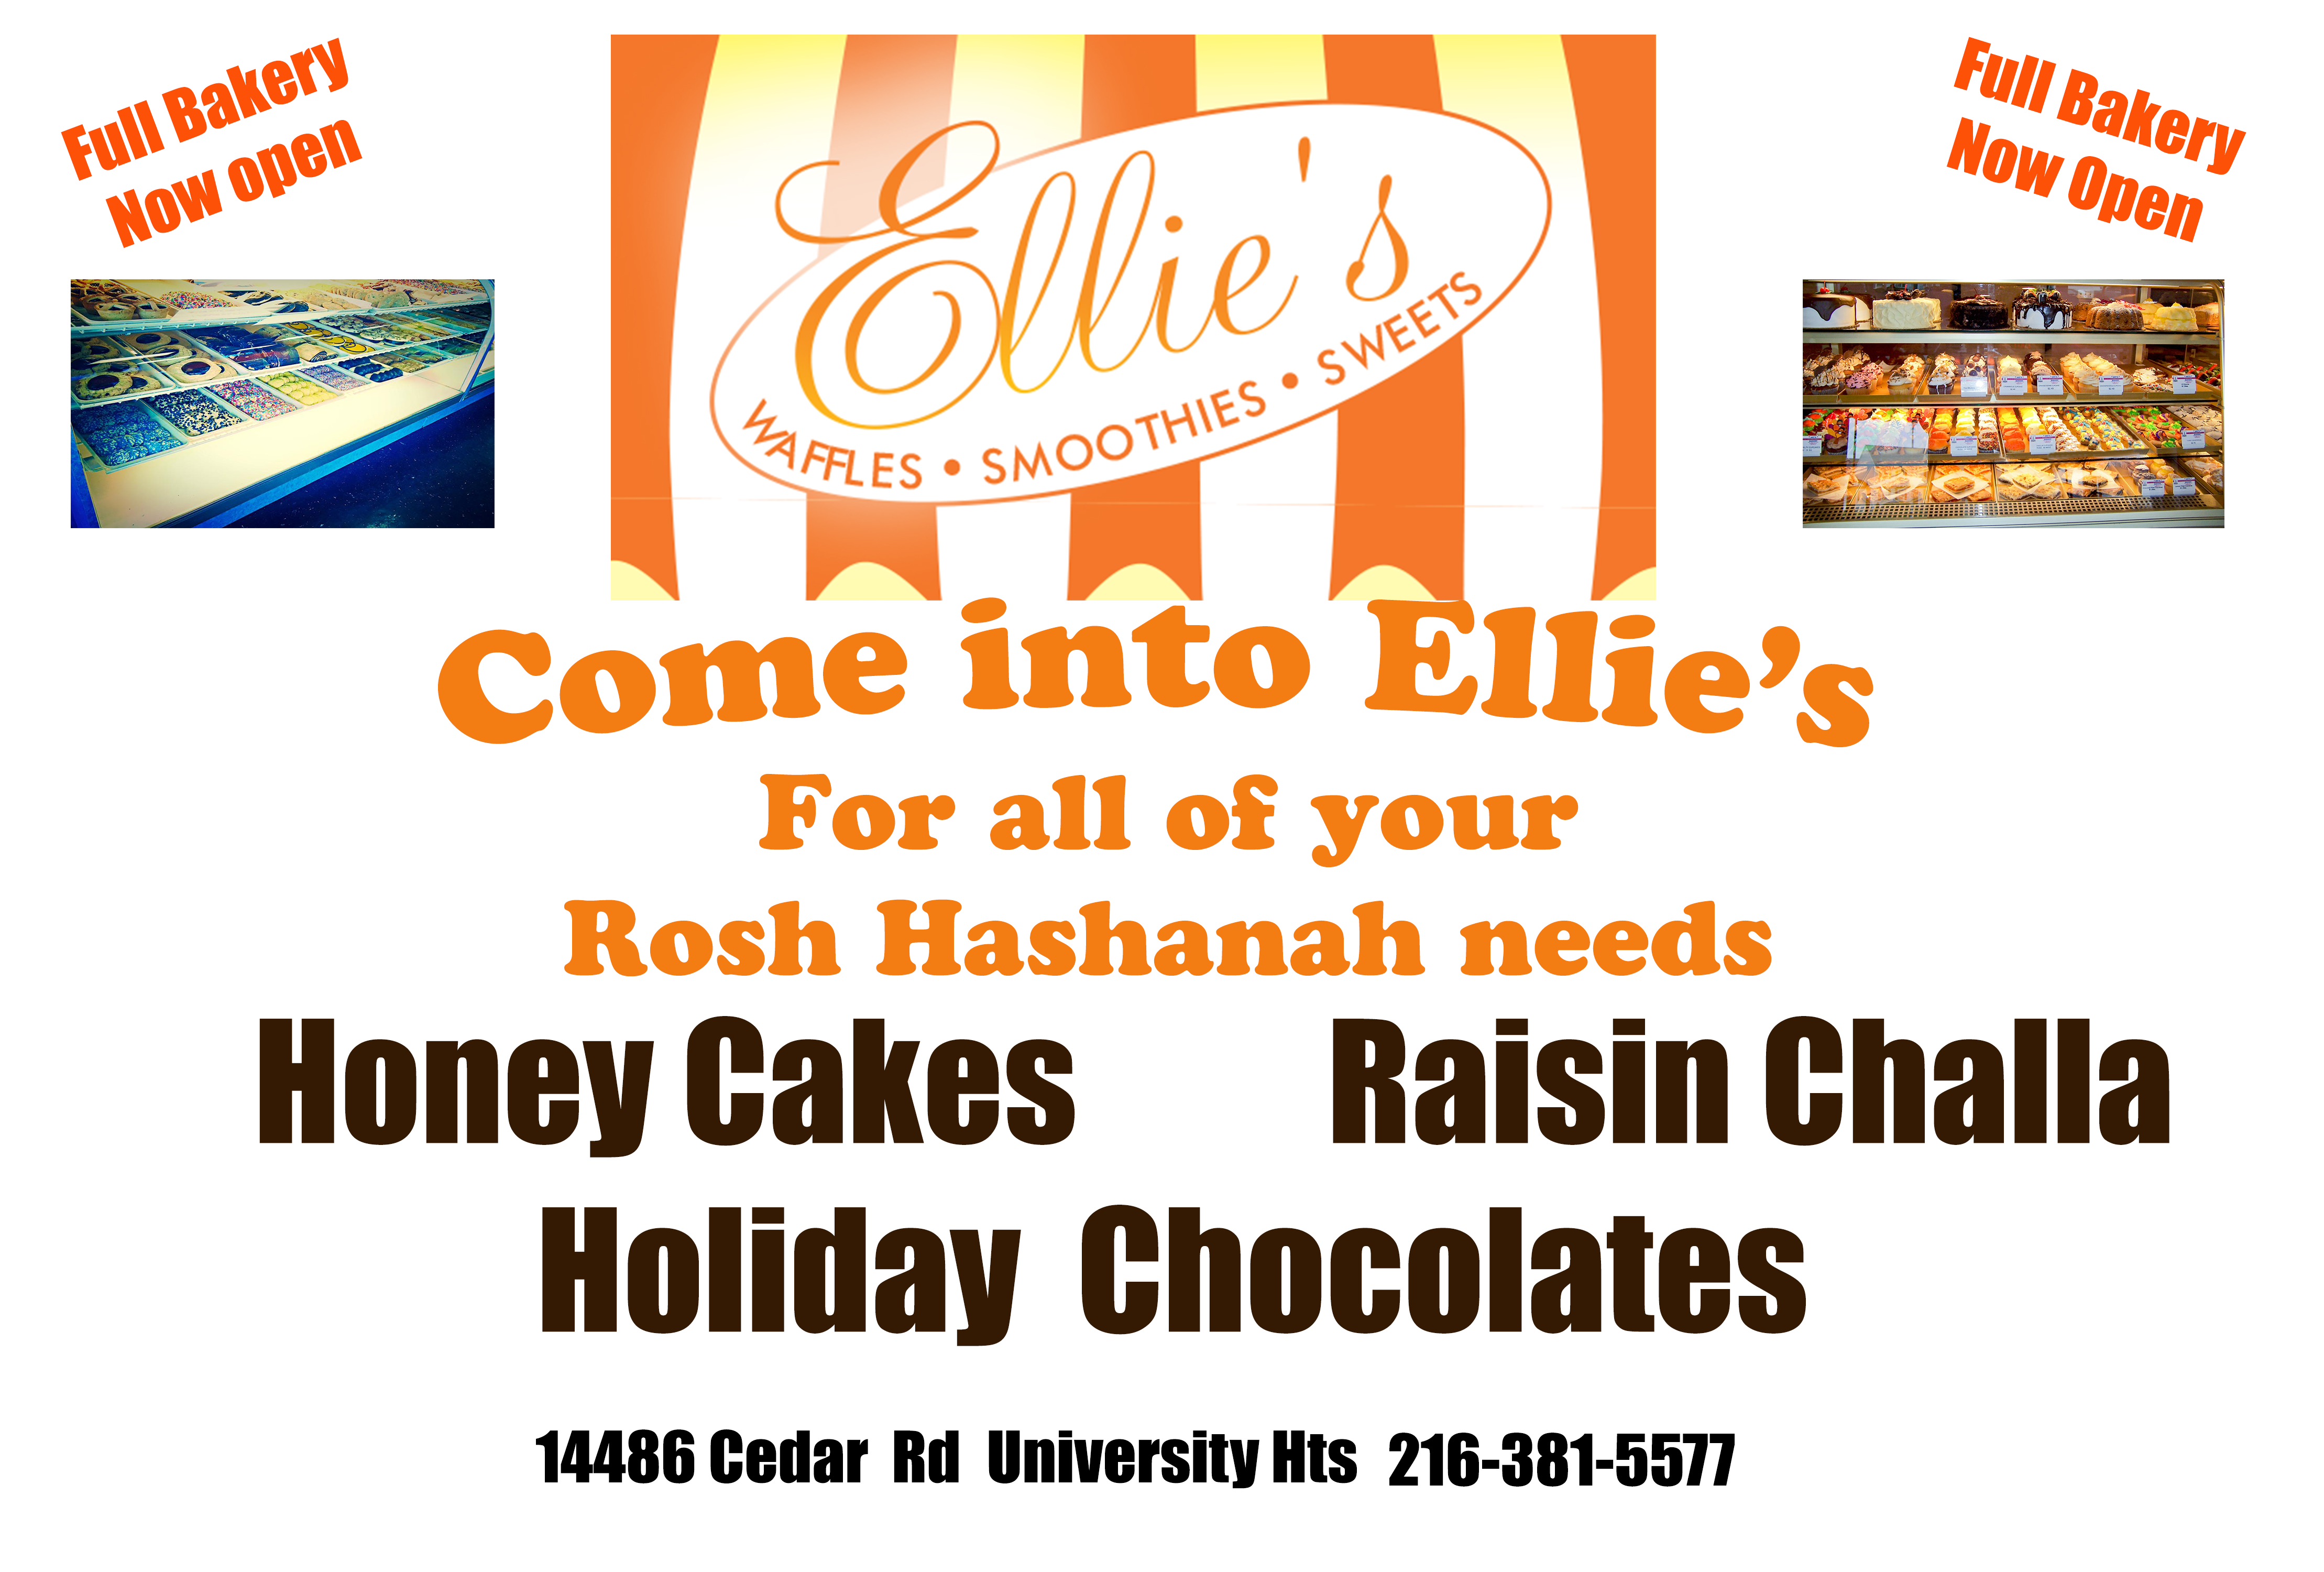 Come into Ellie’s – For All of Your Rosh Hashanah Needs